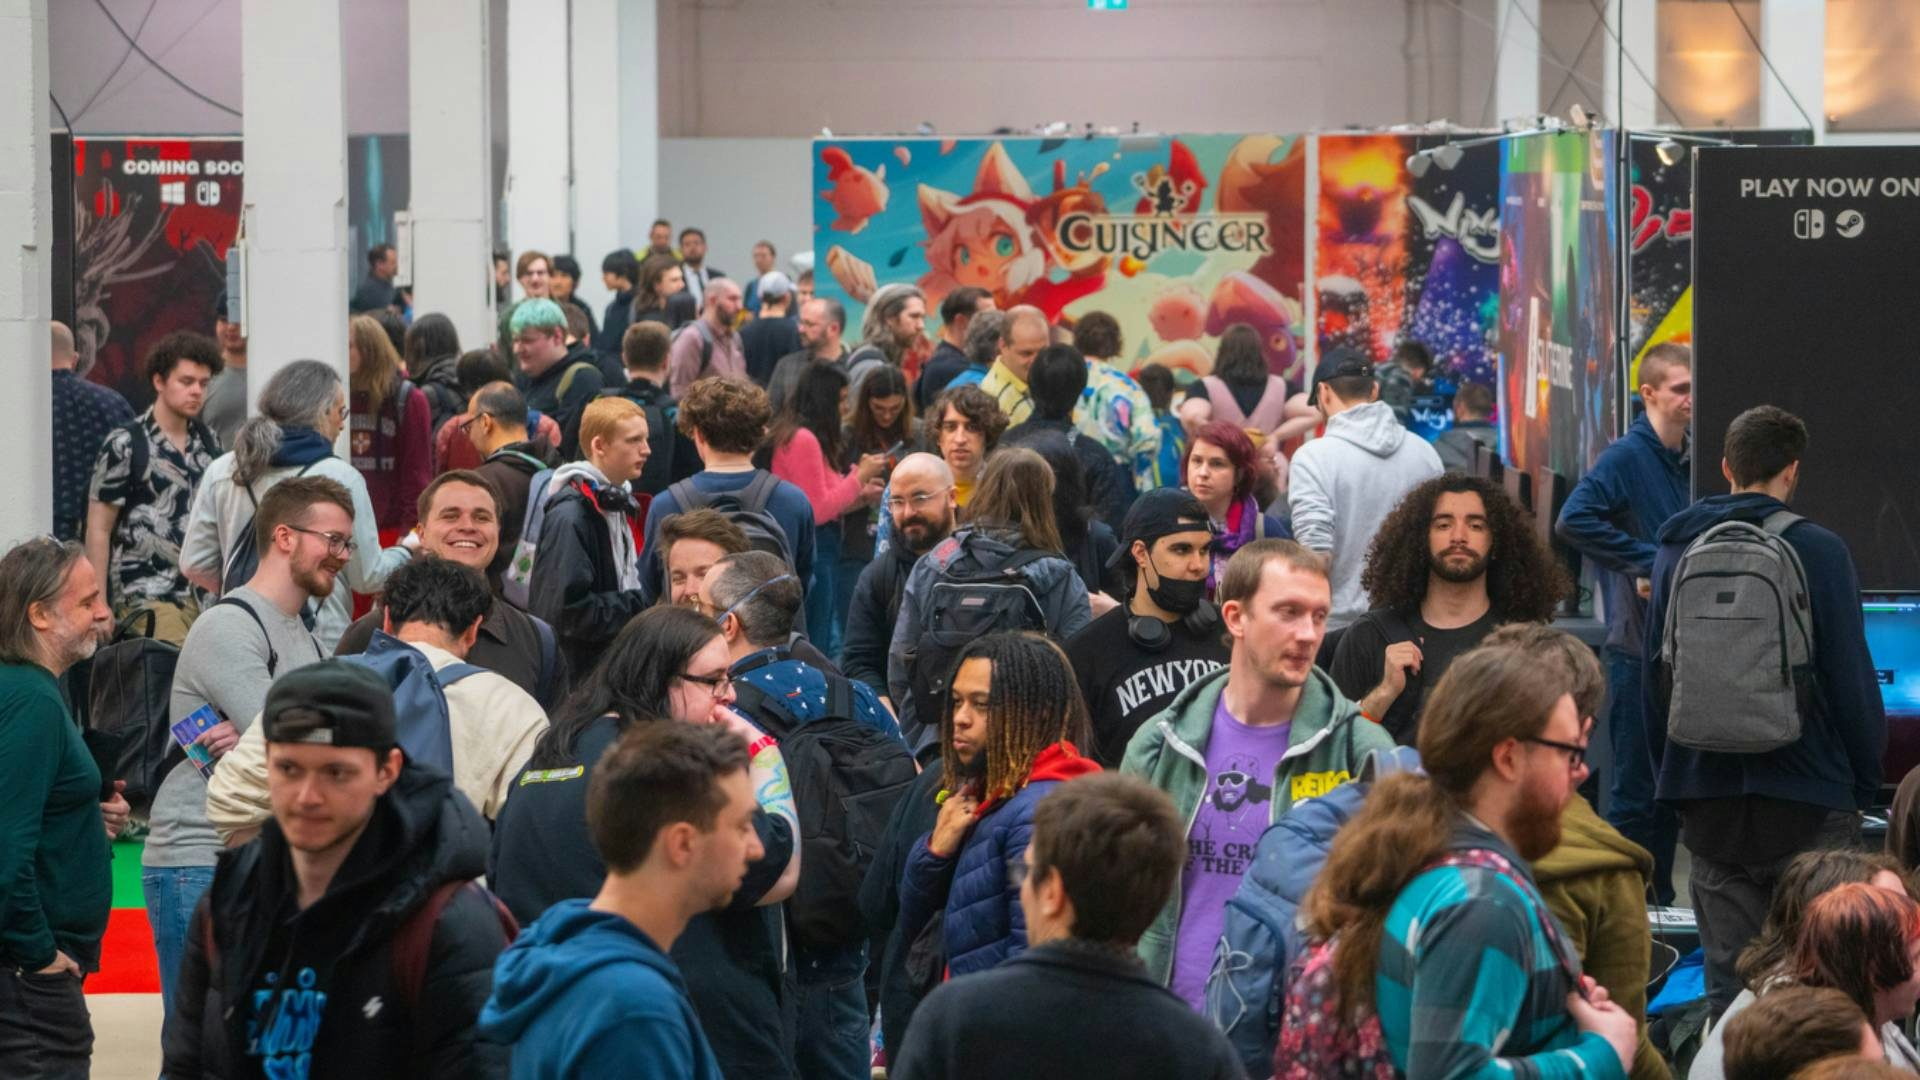 Eight top tips to know before attending WASD (or other video game conventions)